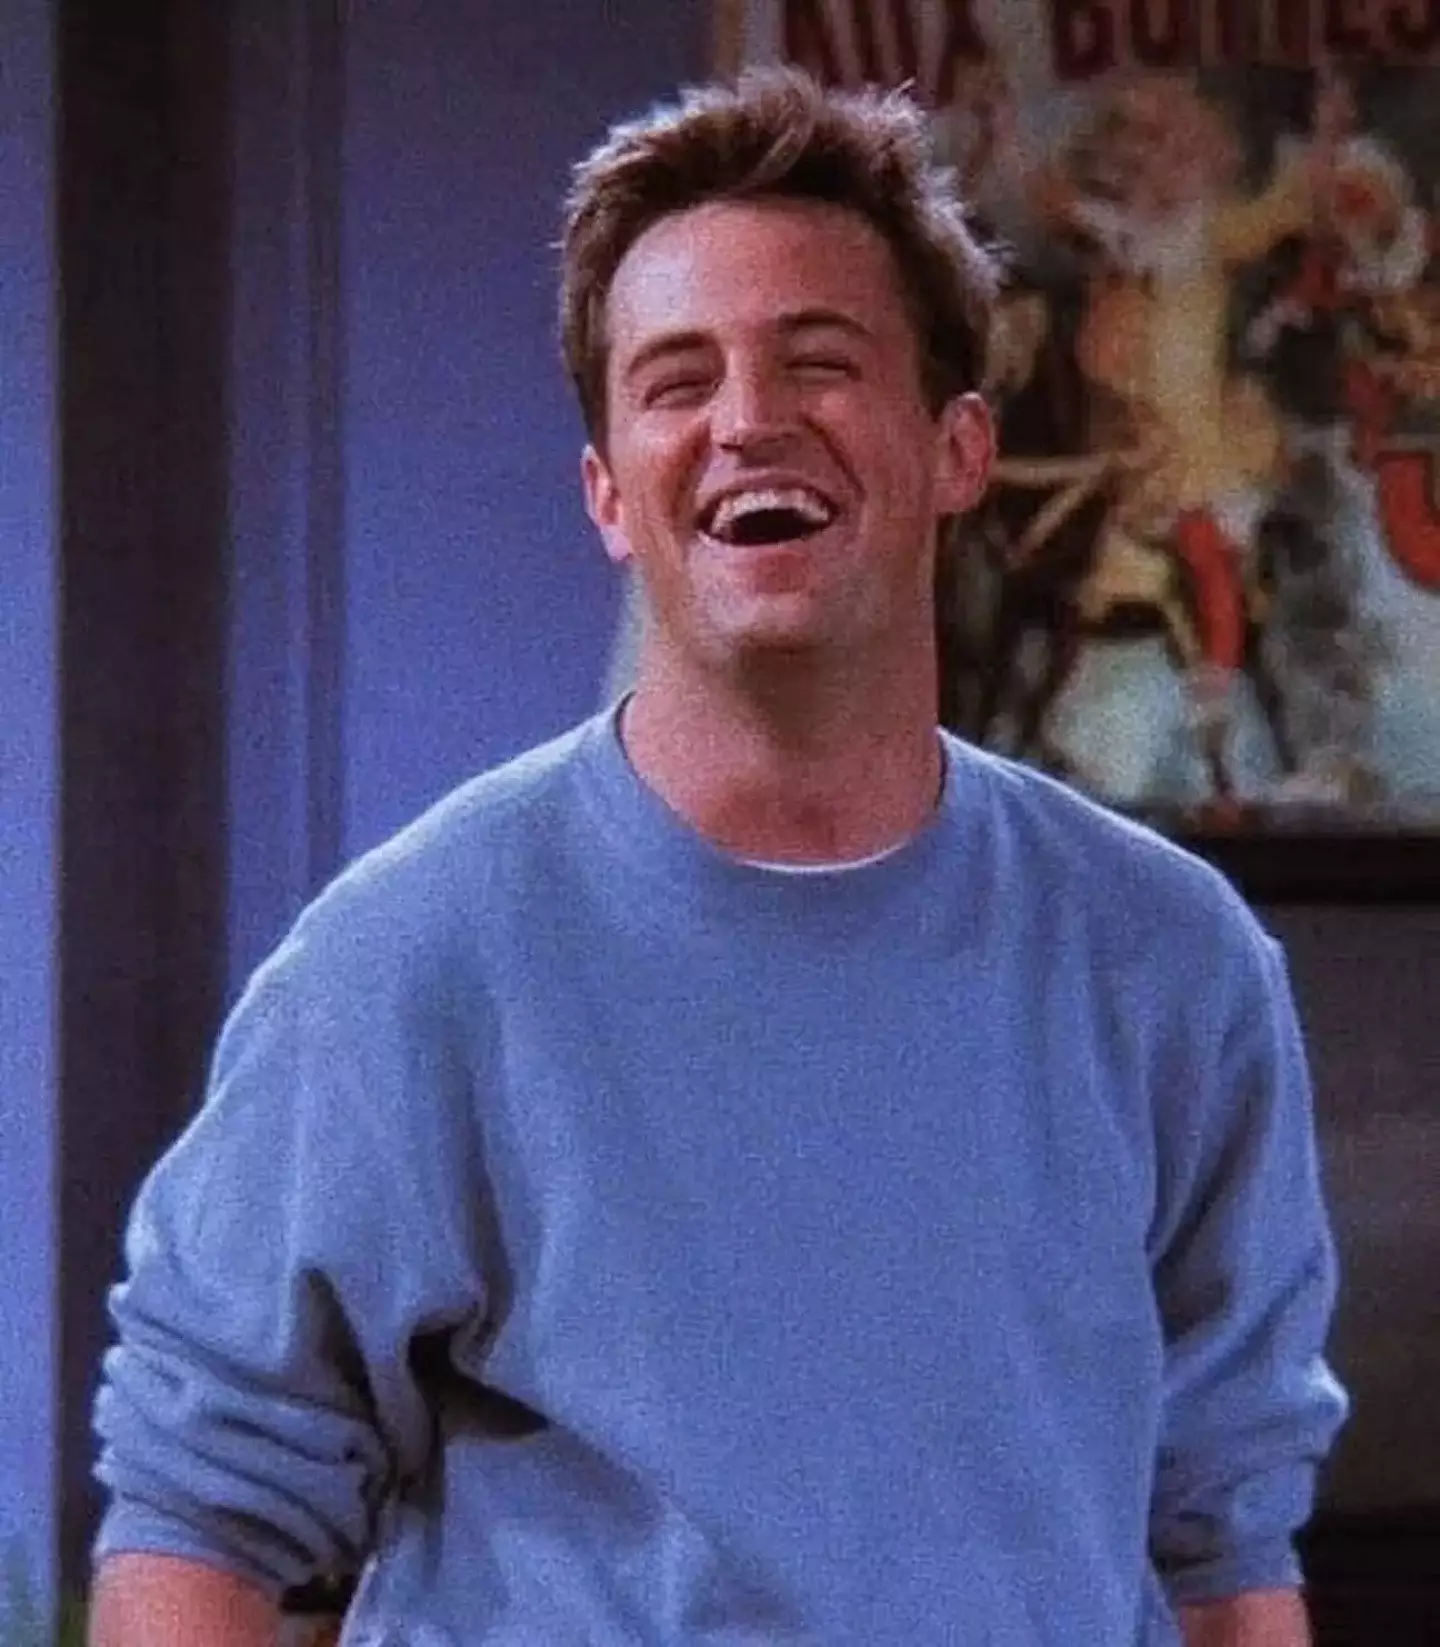 Perry won a SAG Award for his role of Chandler Bing.